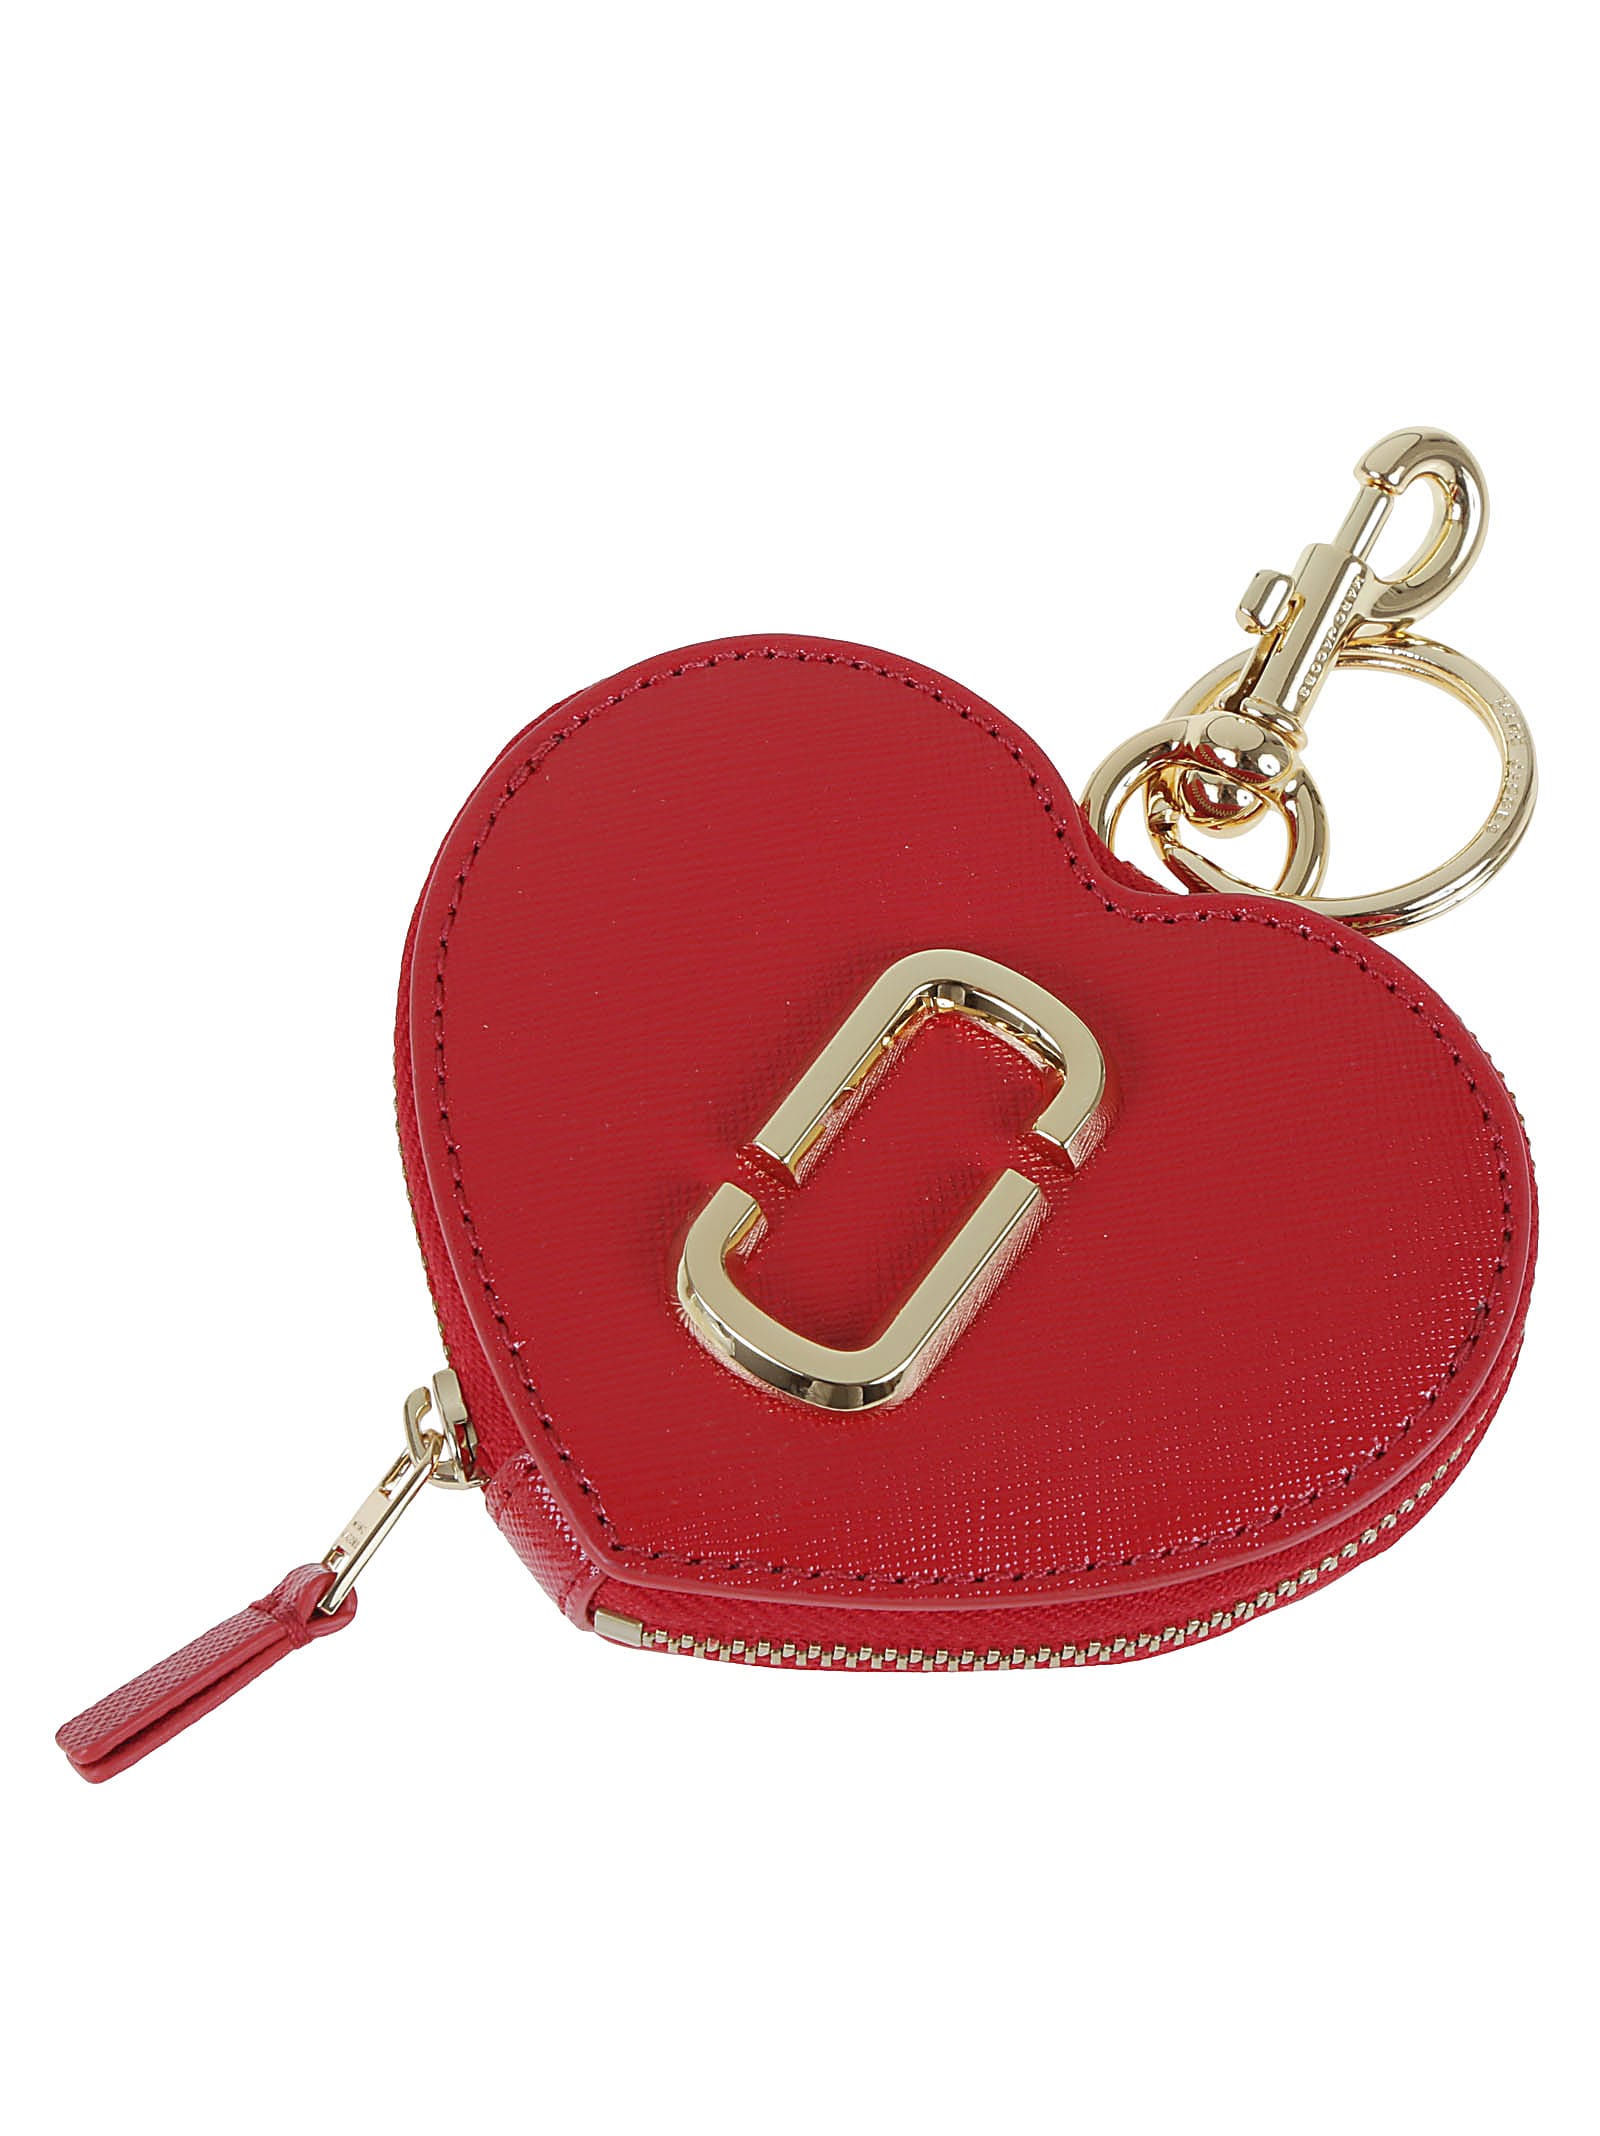 MARC JACOBS THE HEART POUCH